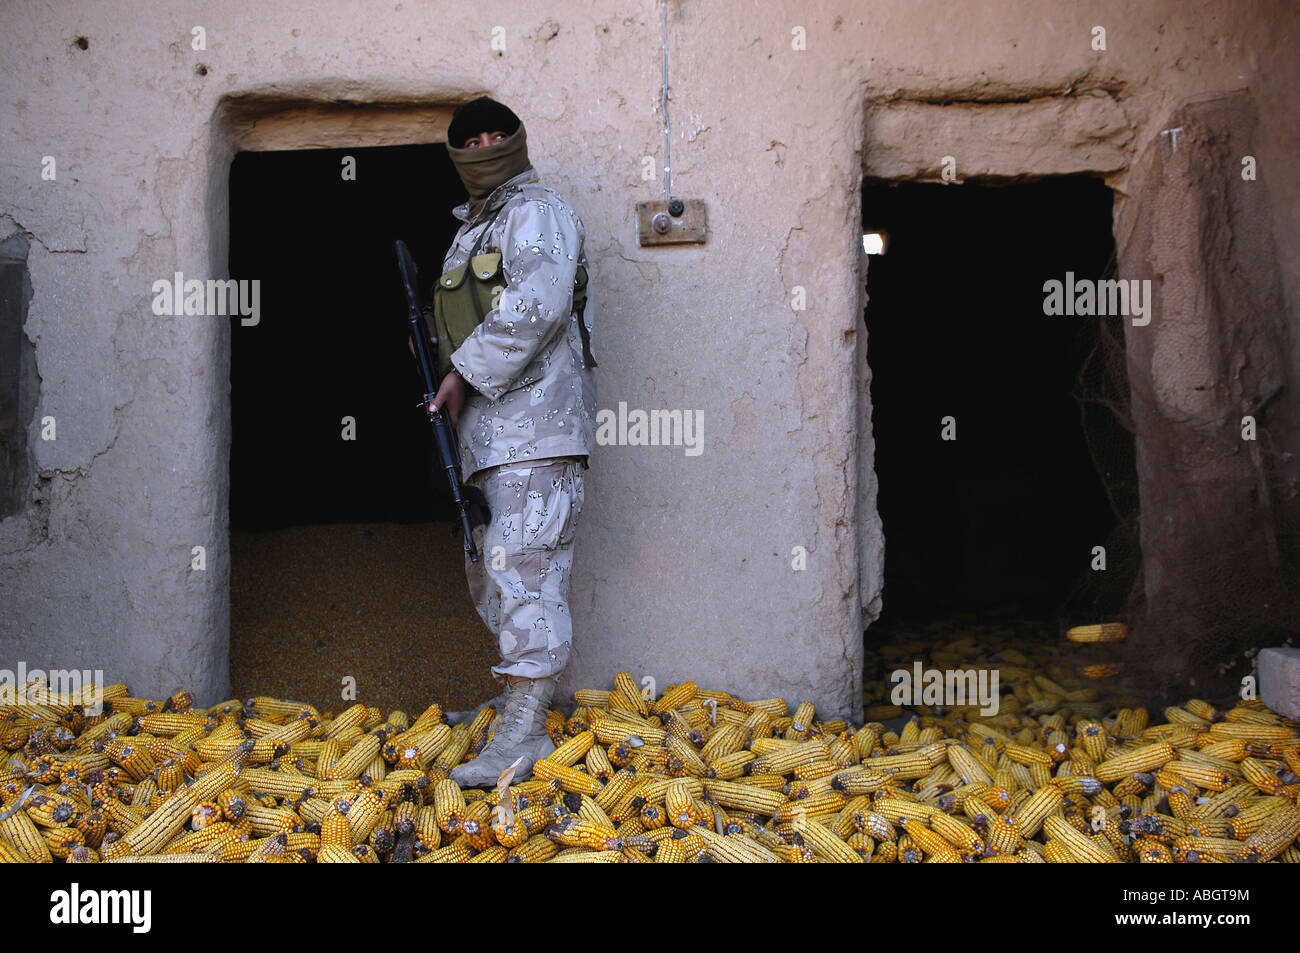 An Iraqi army soldier checks a storage room full of corn during an operation to find weapons caches and insurgents. Stock Photo